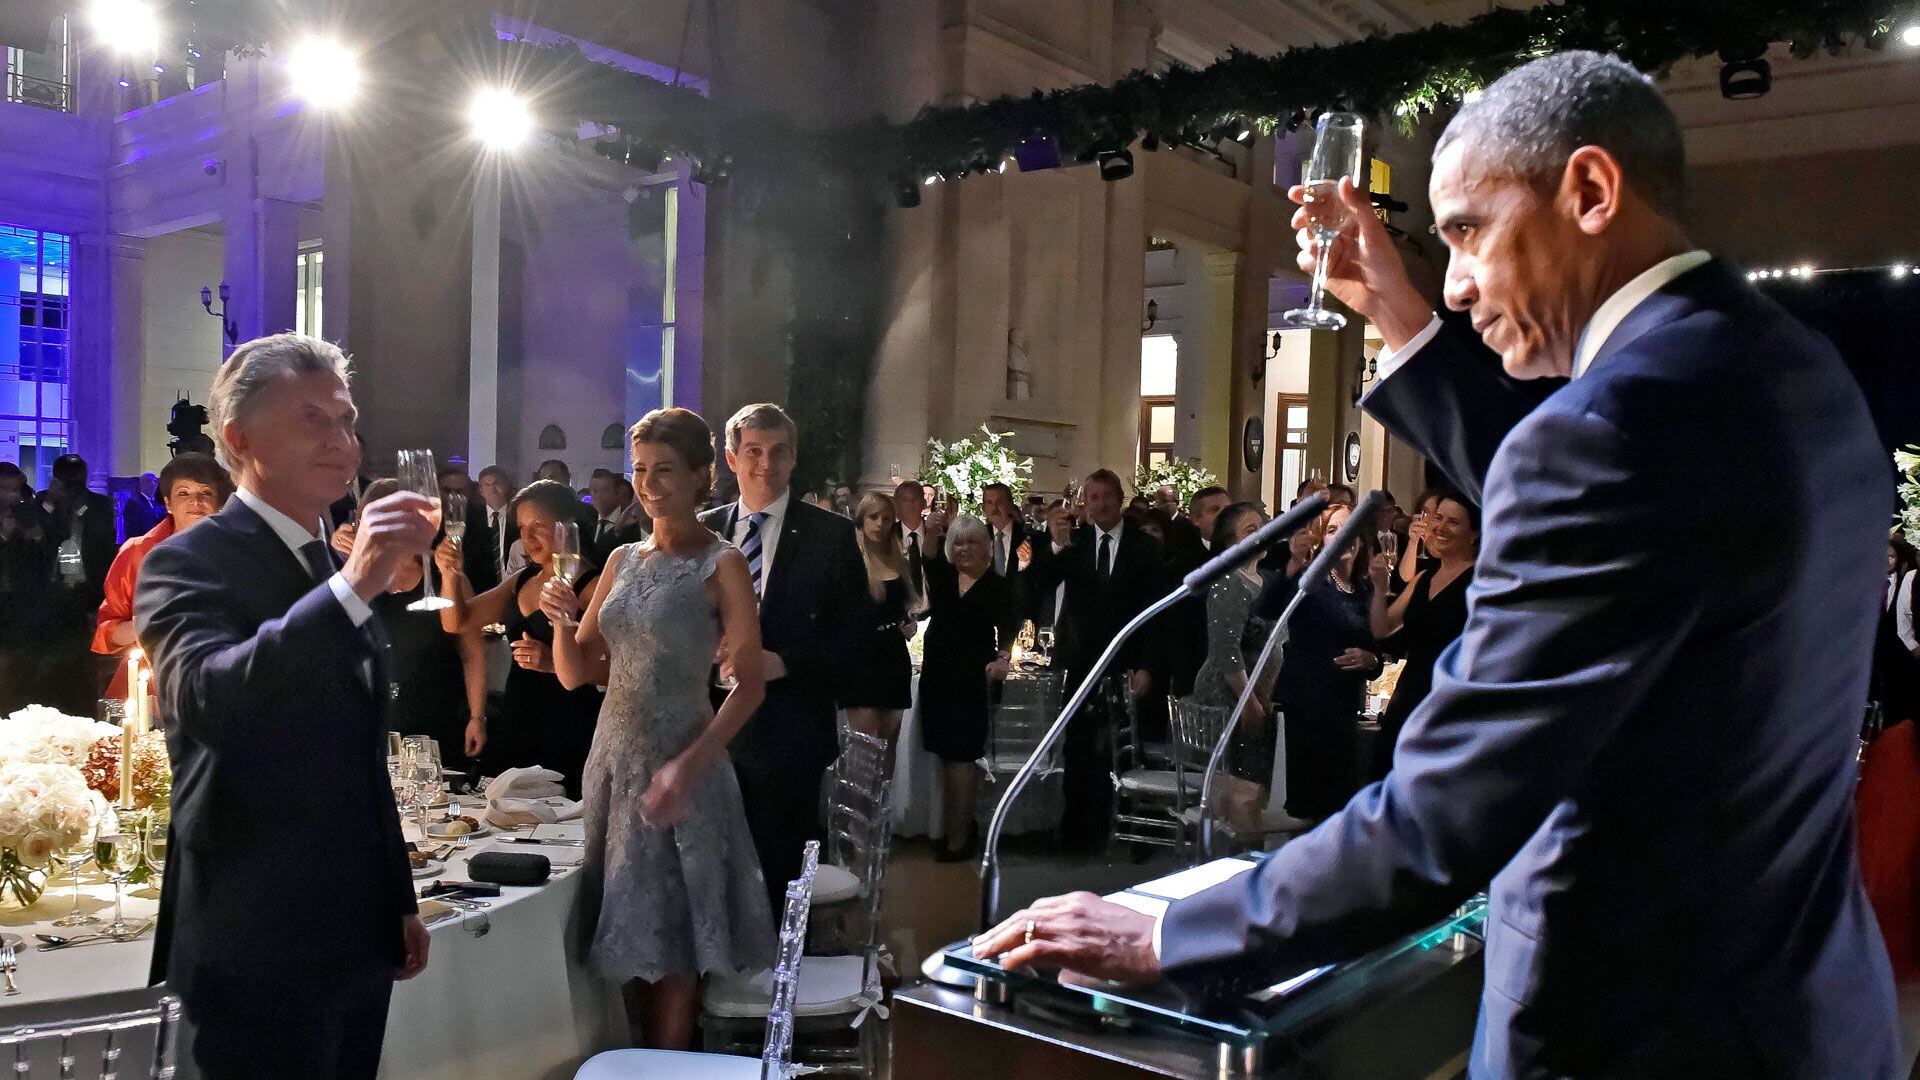 After the speech, Macri and Obama raised their glasses to toast Télam 162